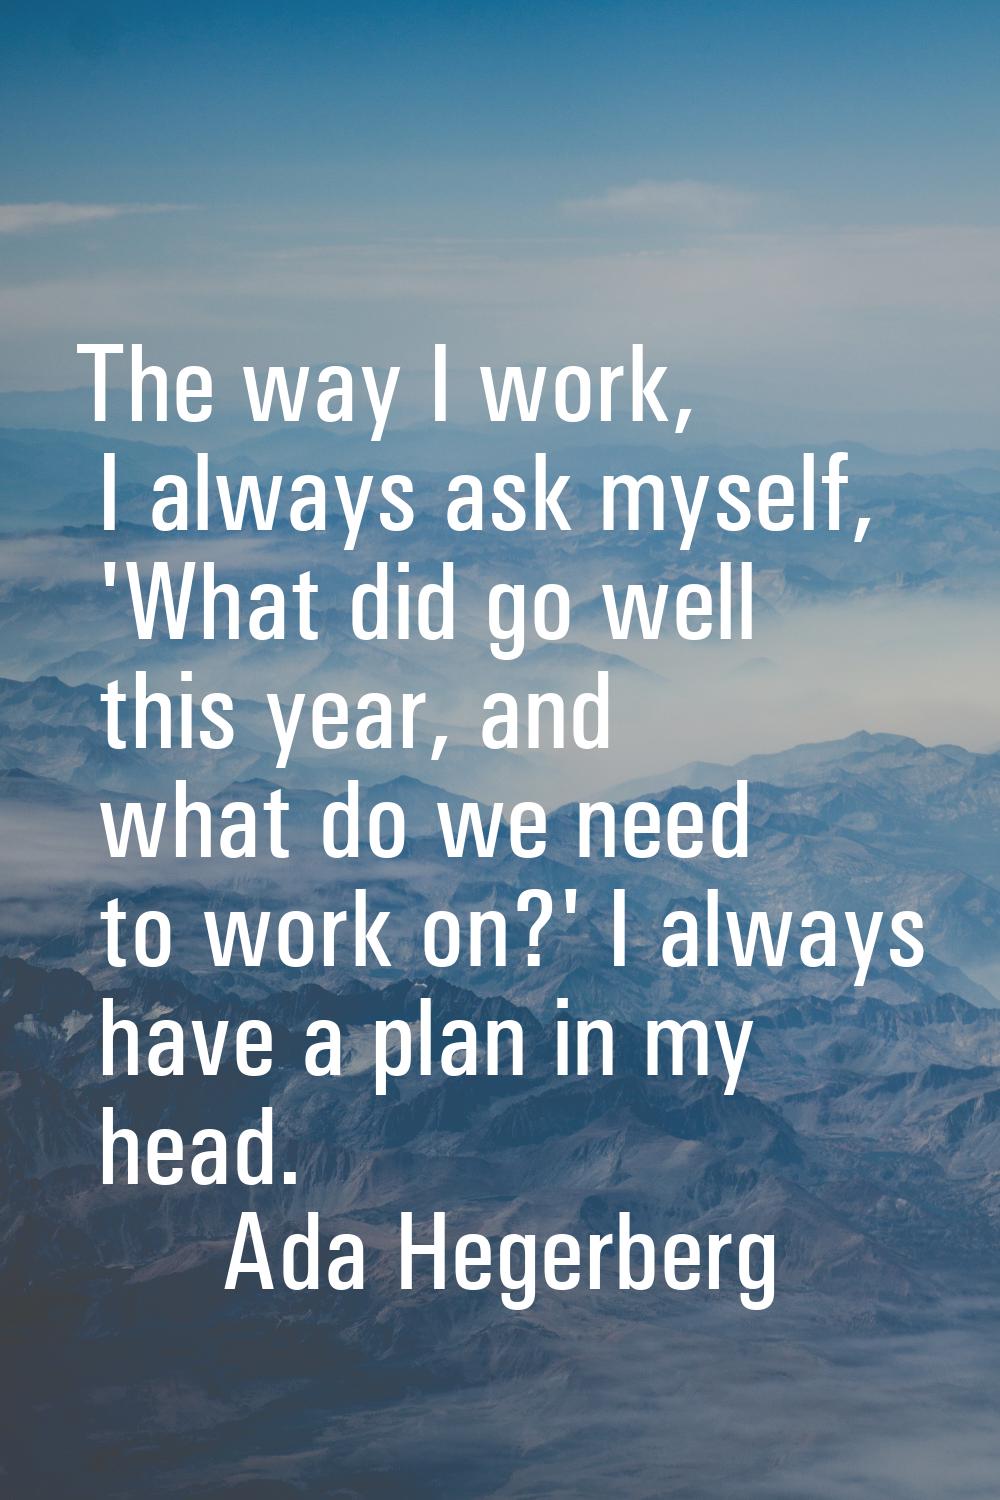 The way I work, I always ask myself, 'What did go well this year, and what do we need to work on?' 